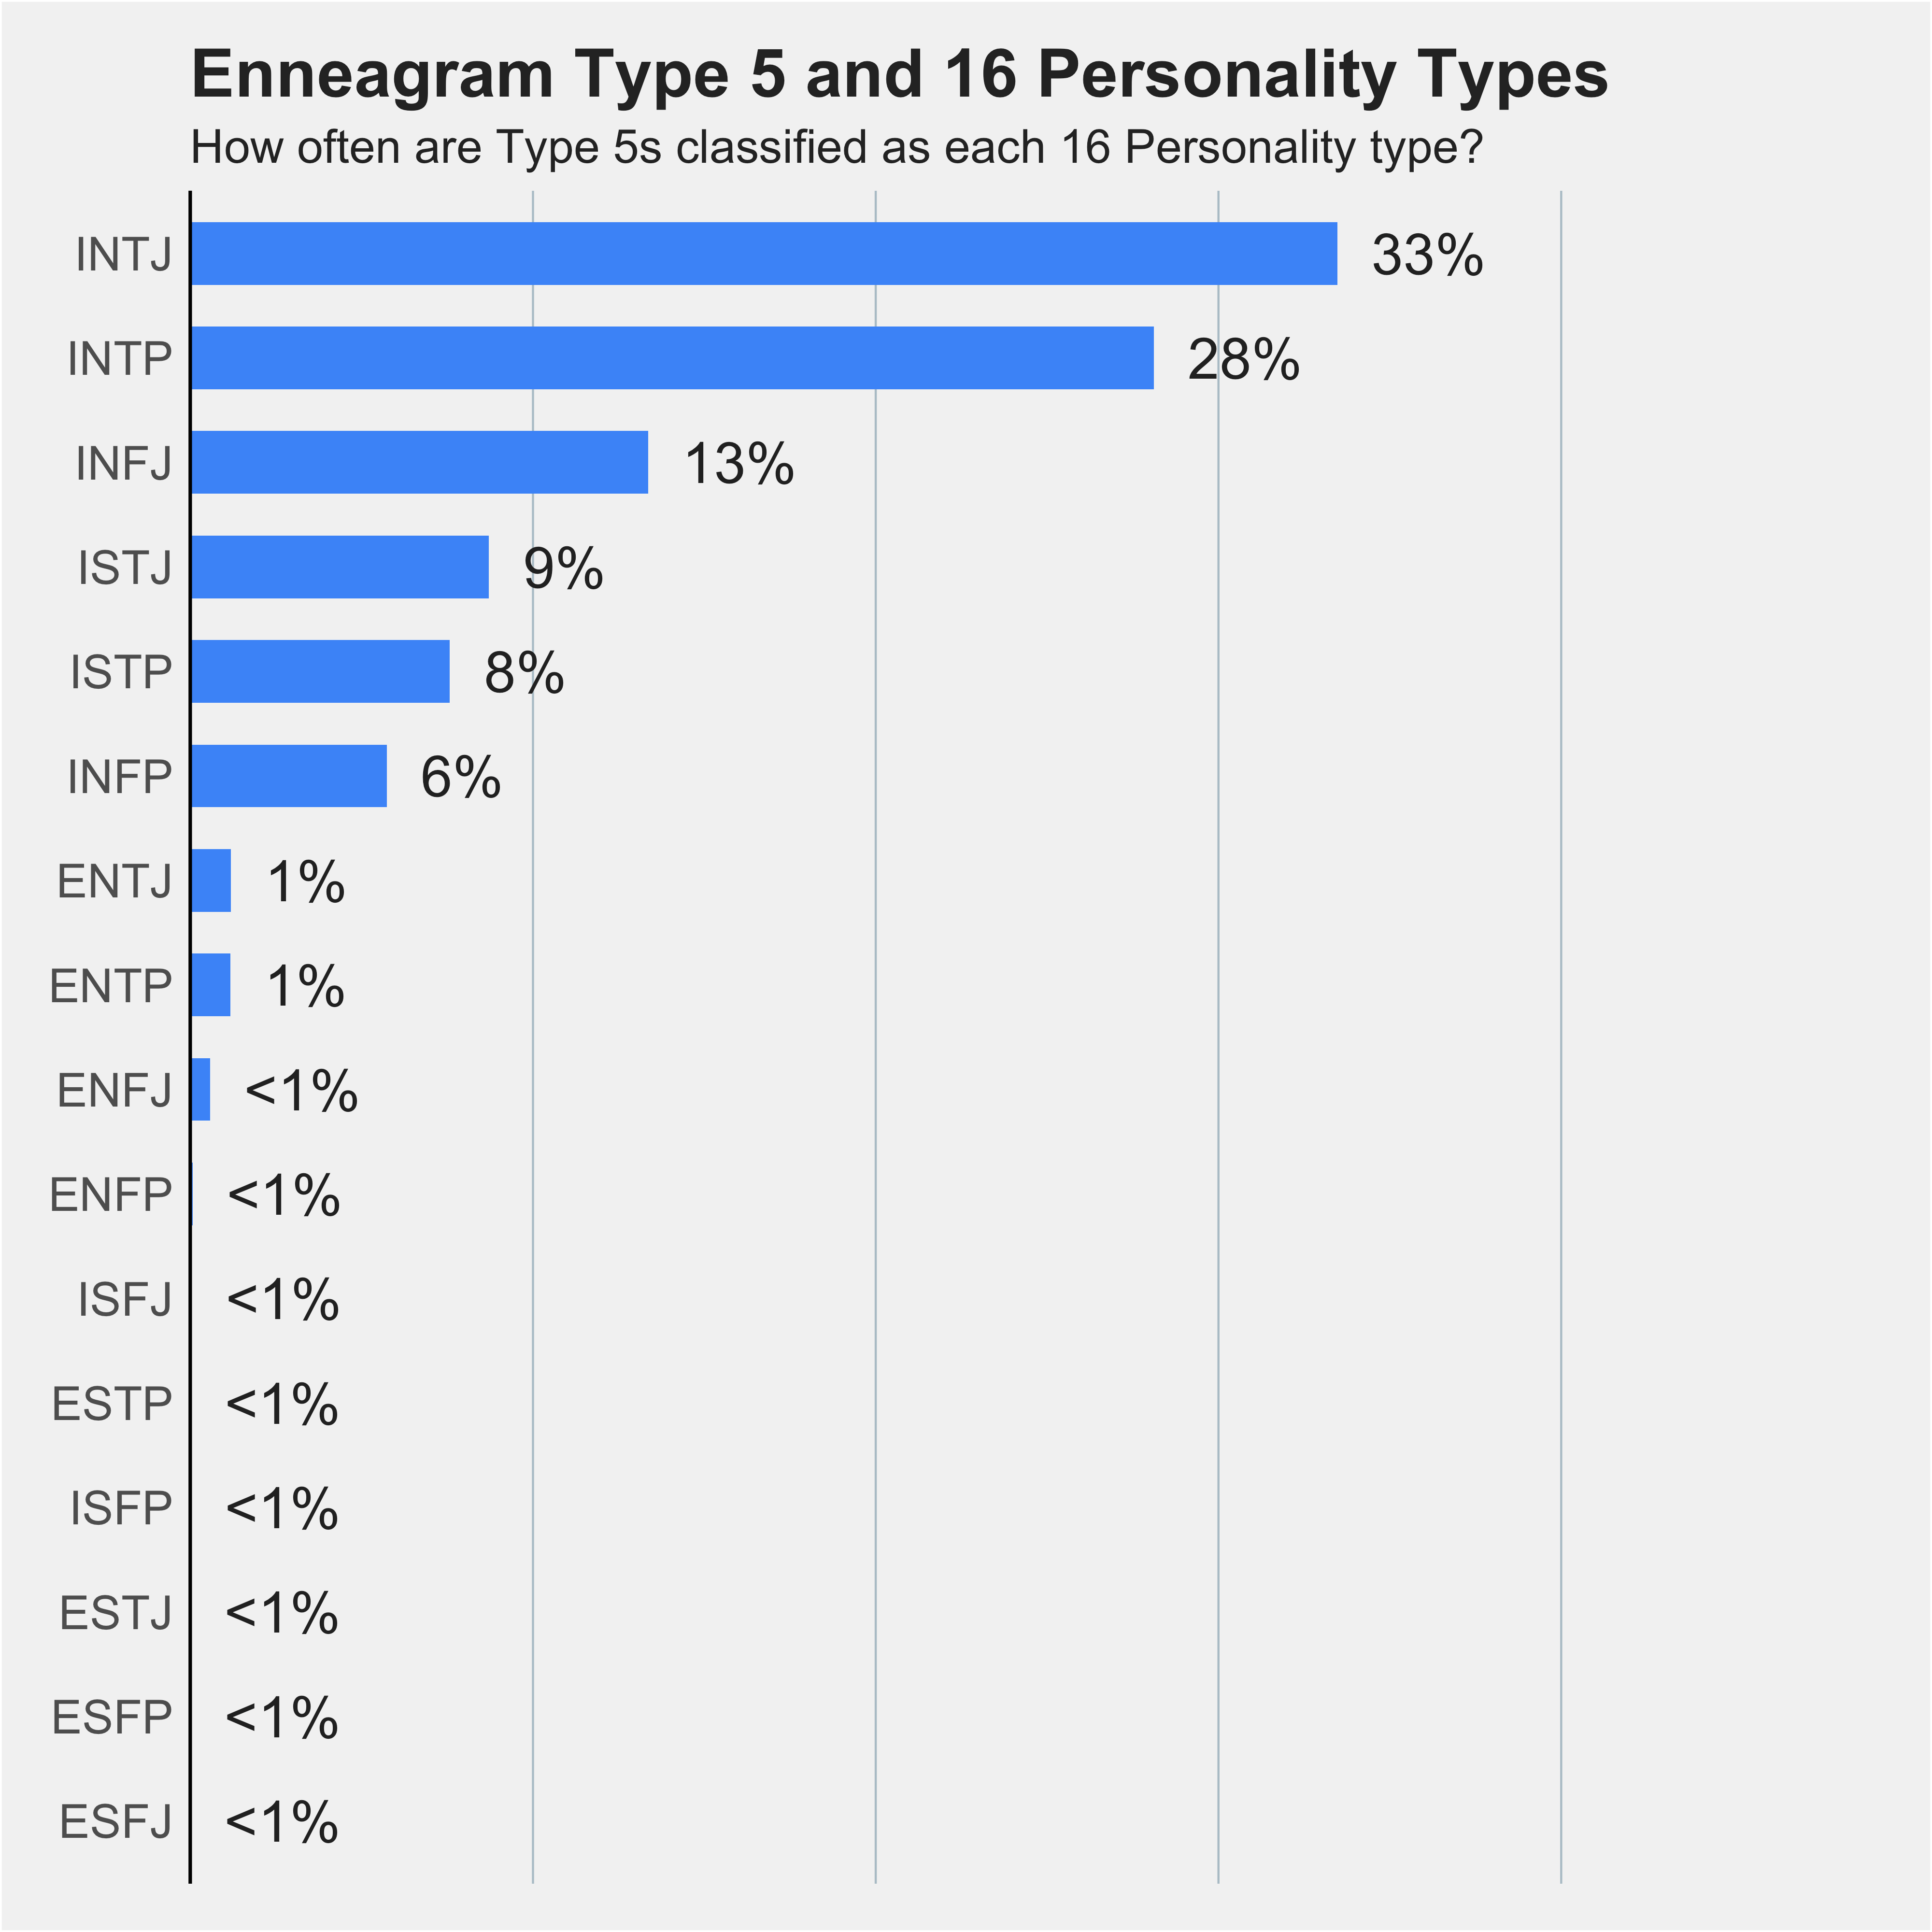 Chart of Type 5s percentages across 16 Personality types 